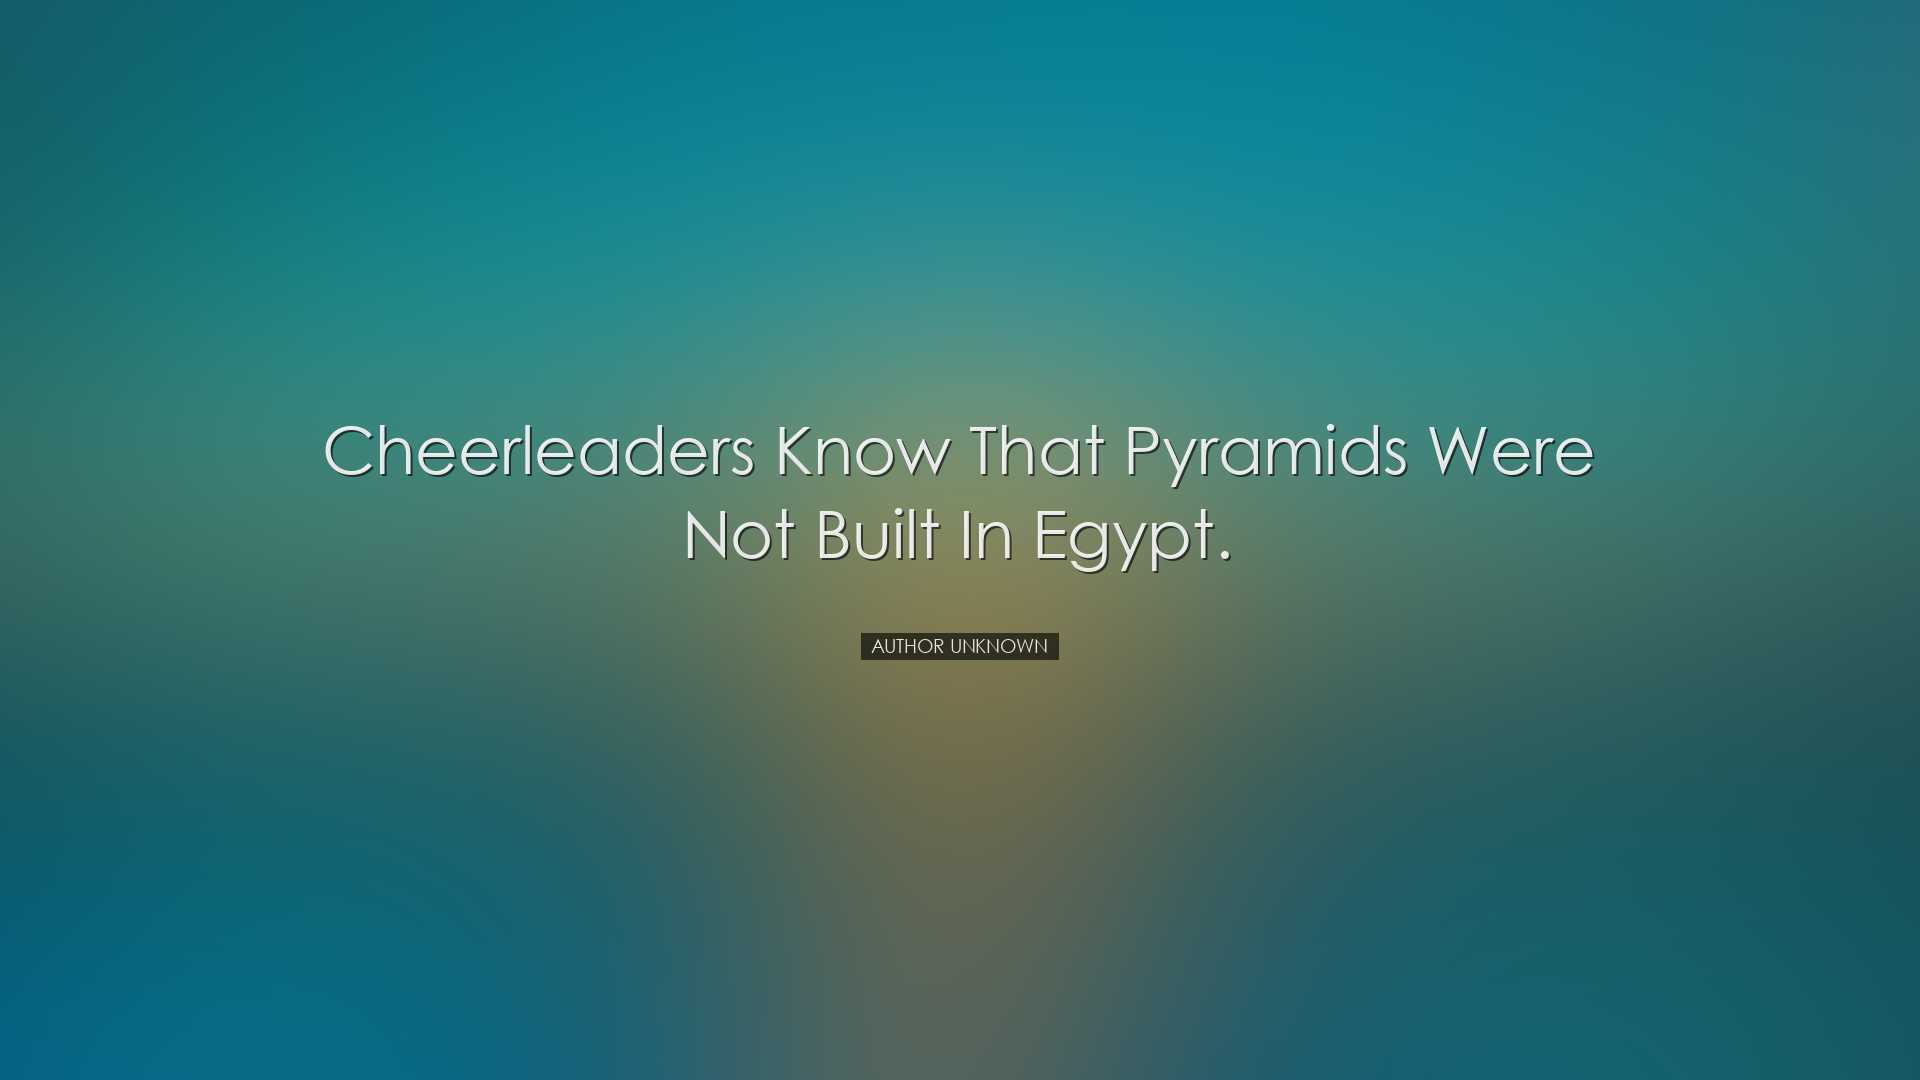 Cheerleaders know that pyramids were not built in Egypt. - Author